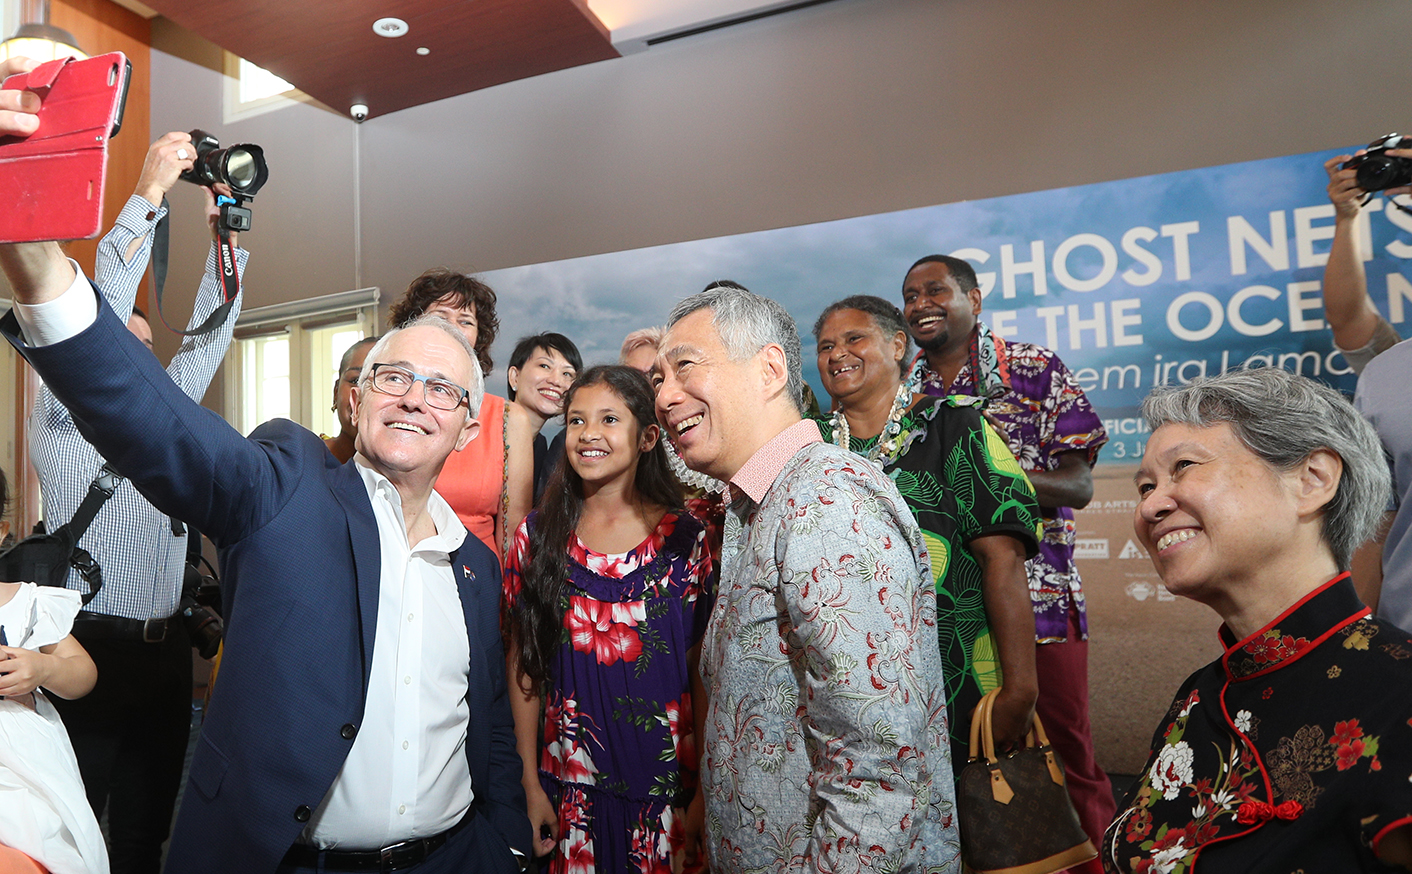 PM Lee Hsien Loong at the opening of the Ghost Nets of the Ocean exhibition on 3 June 2017 (MCI Photo by Chwee)